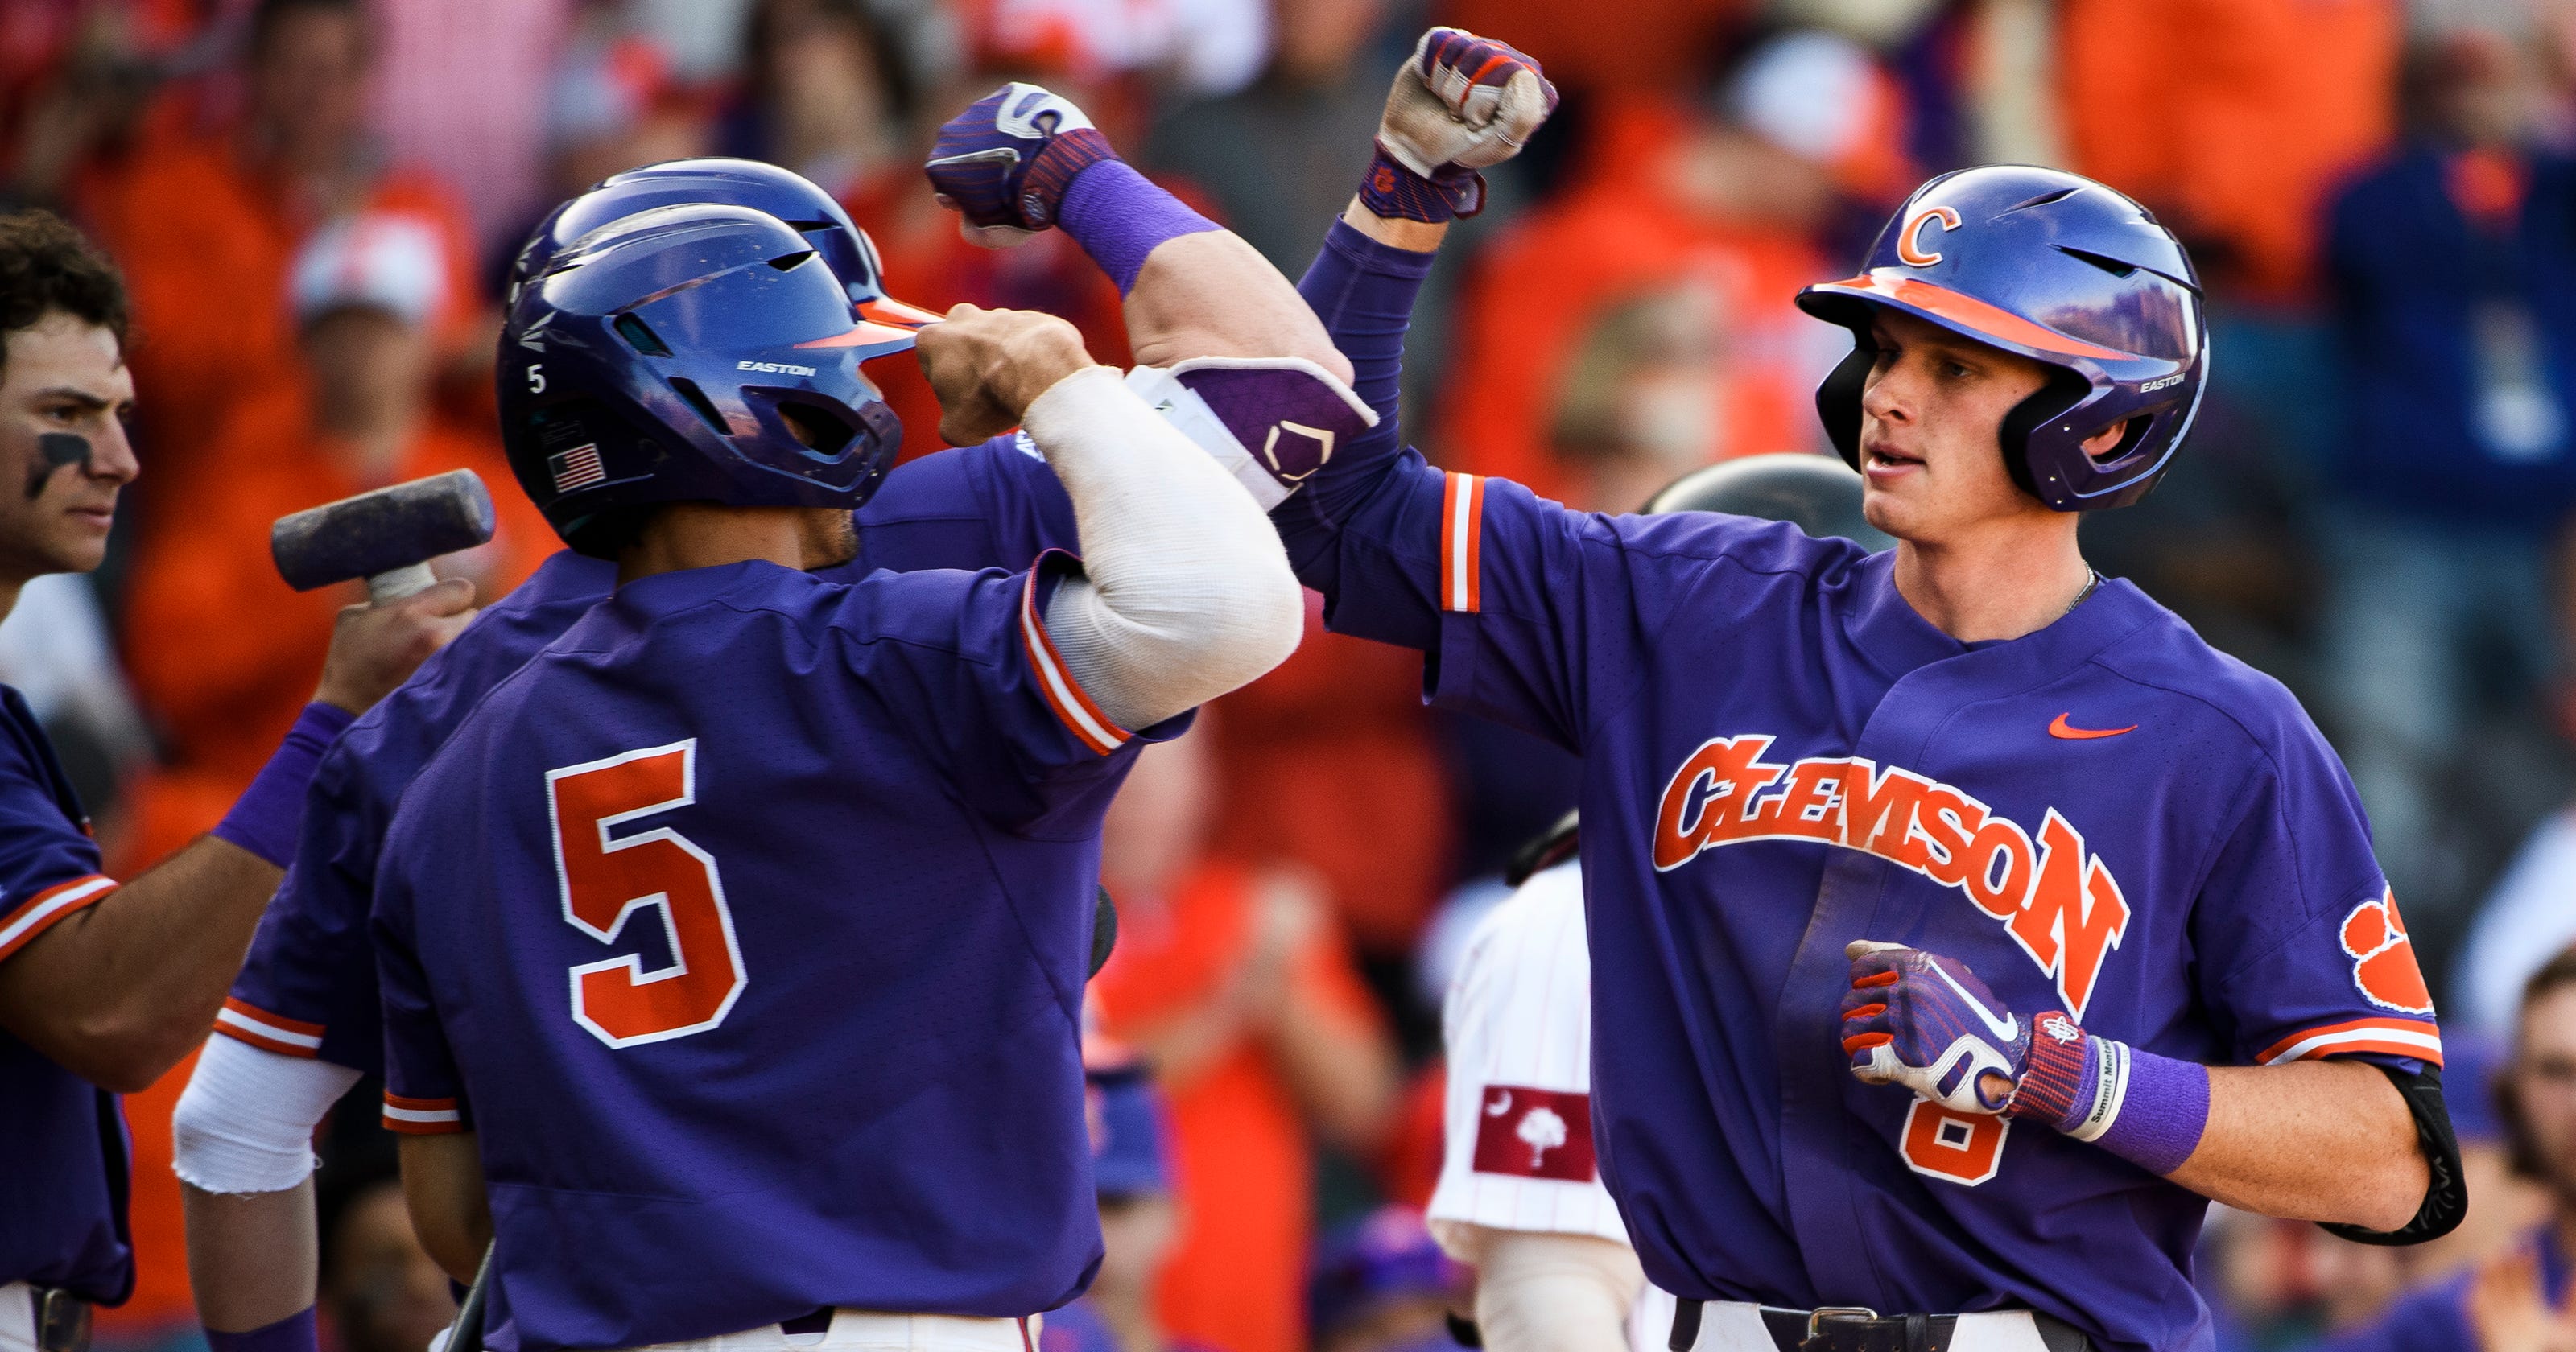 Clemson baseball plays long ball in victory against South Carolina